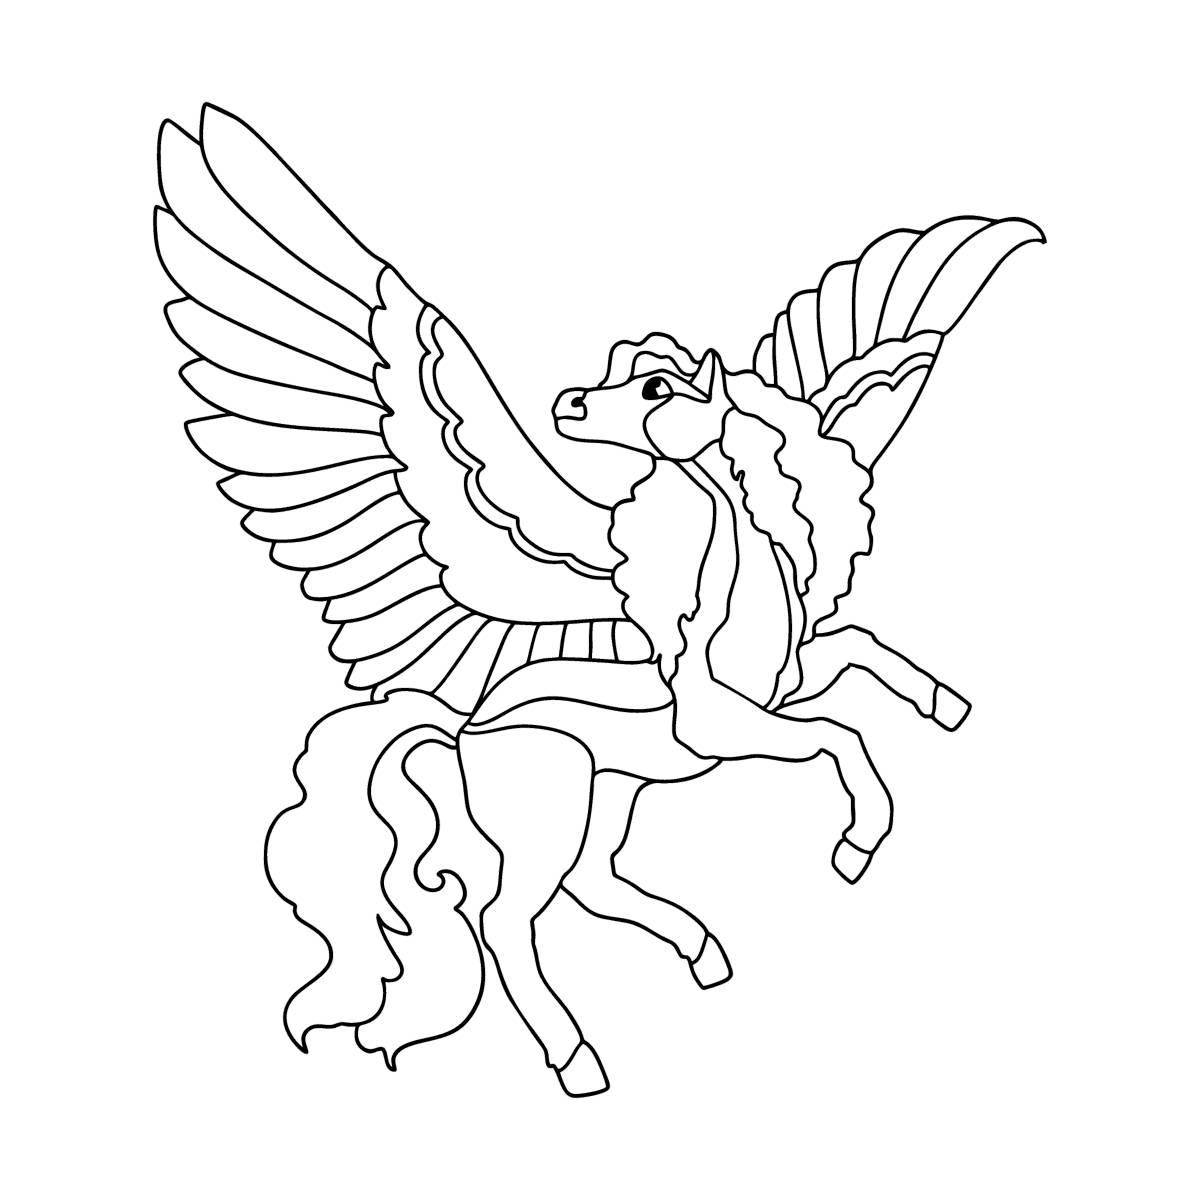 Horse with wings #4